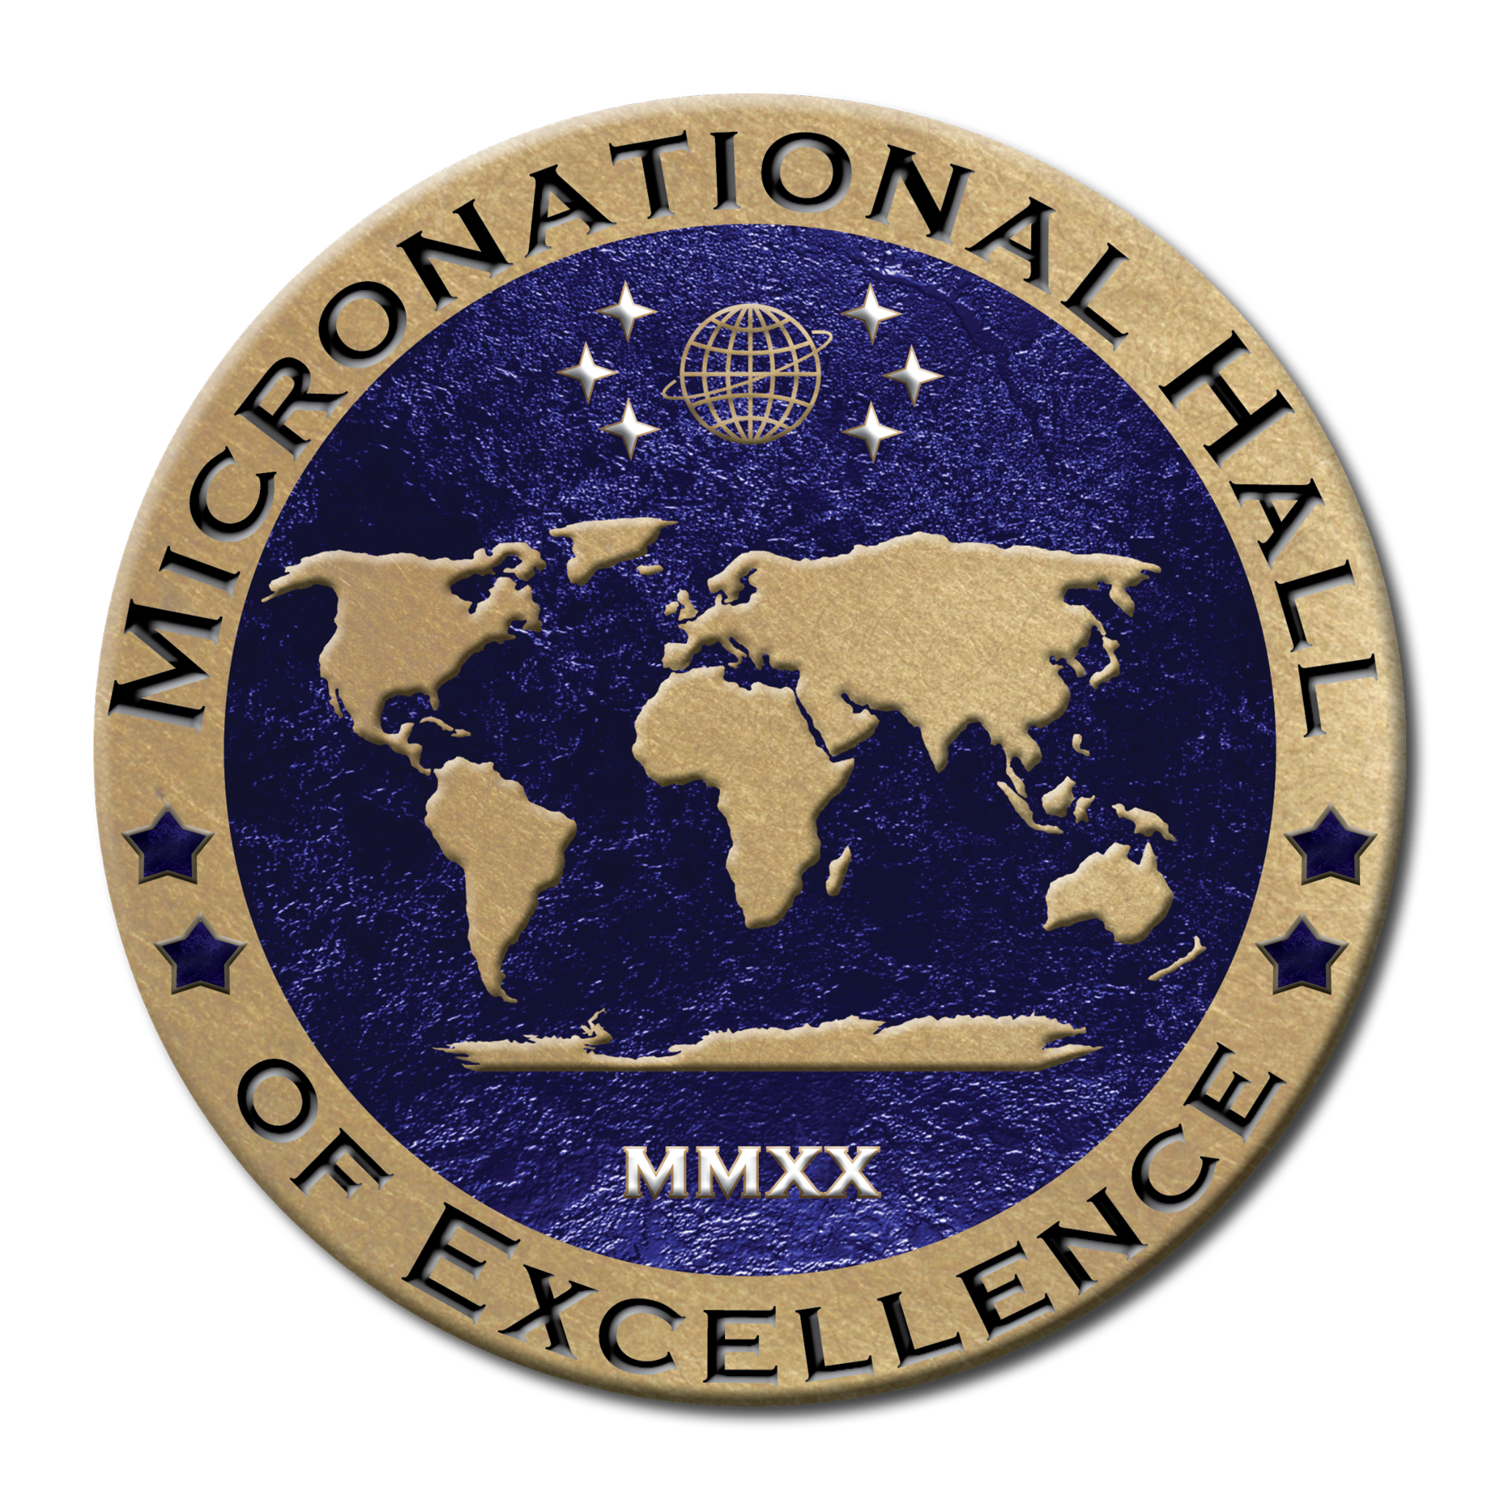 Micronational Hall of Excellence